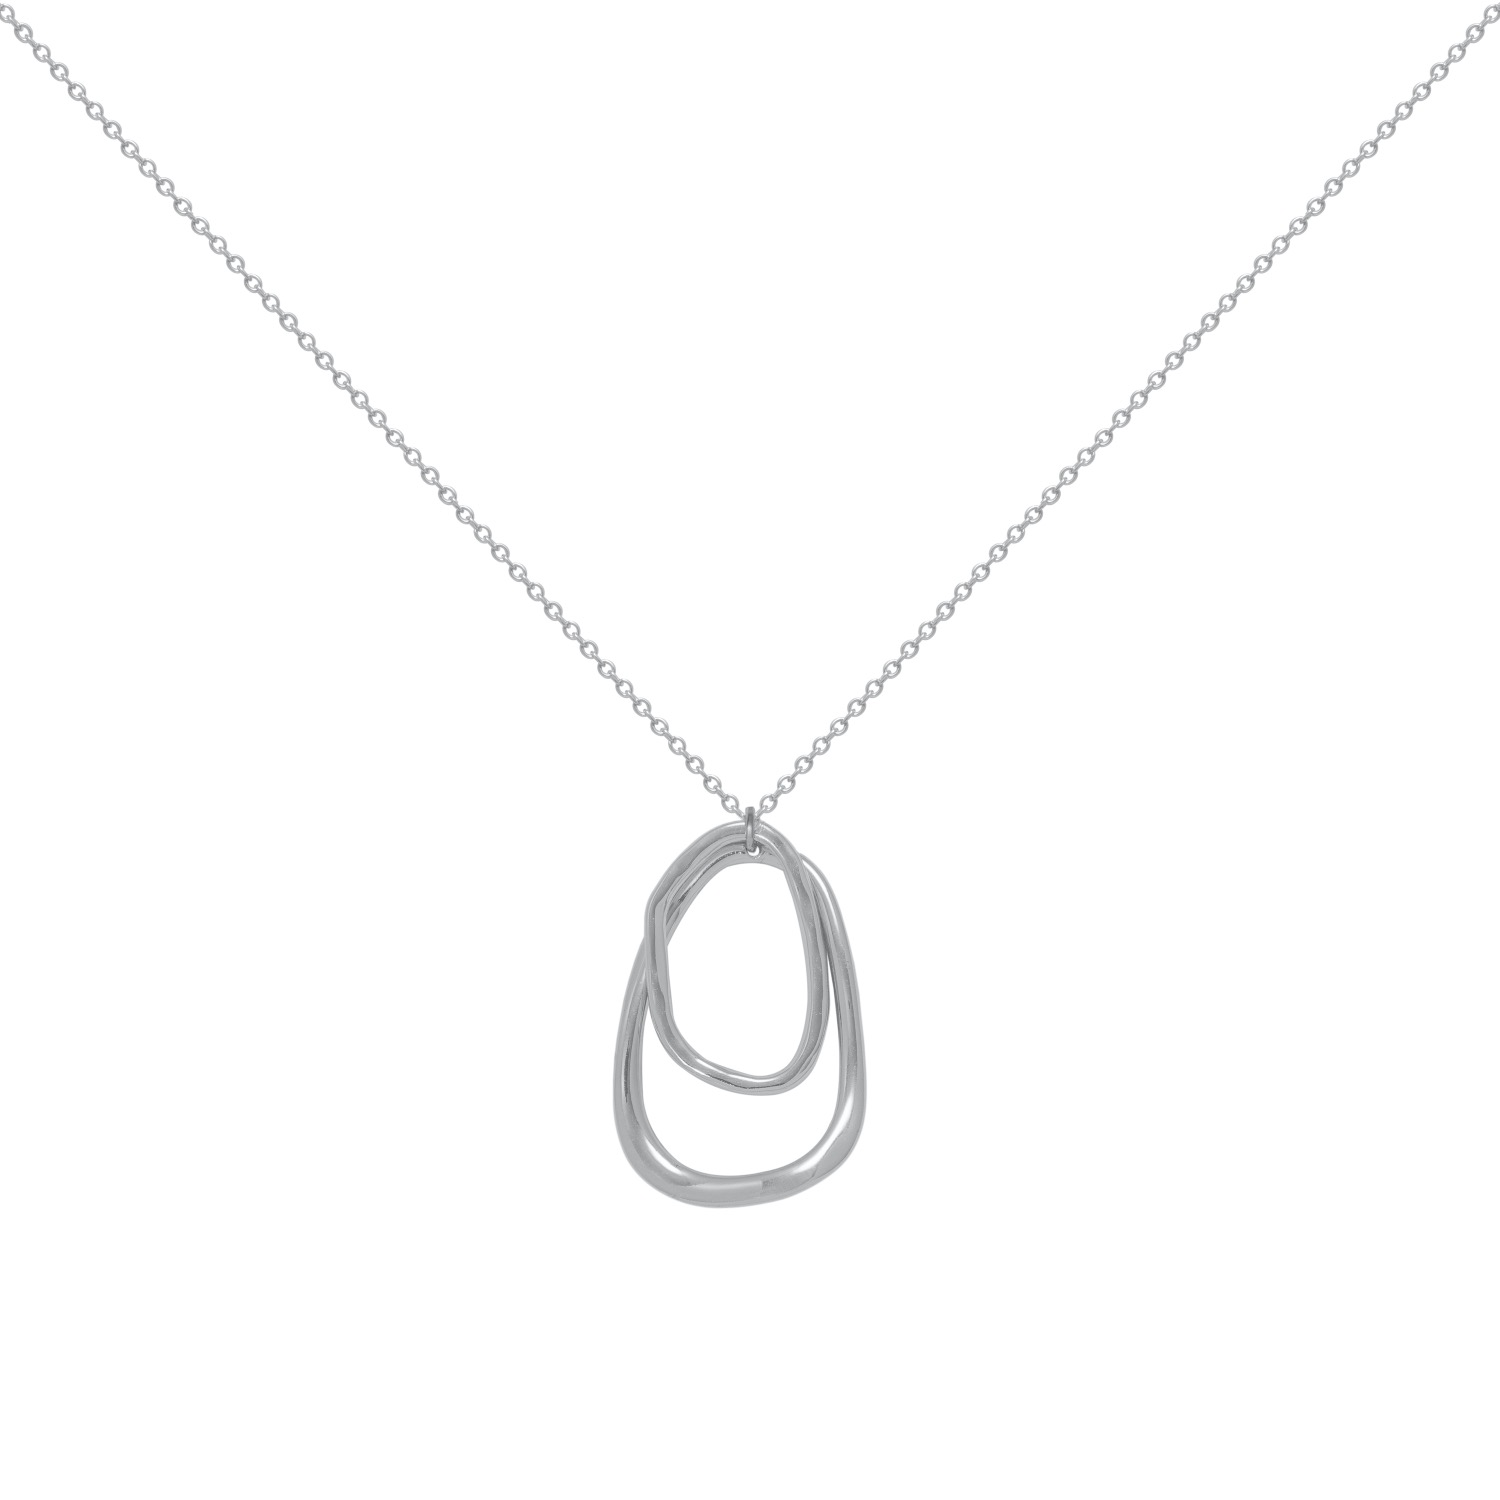 Women’s Silver Willa Necklace A Weathered Penny